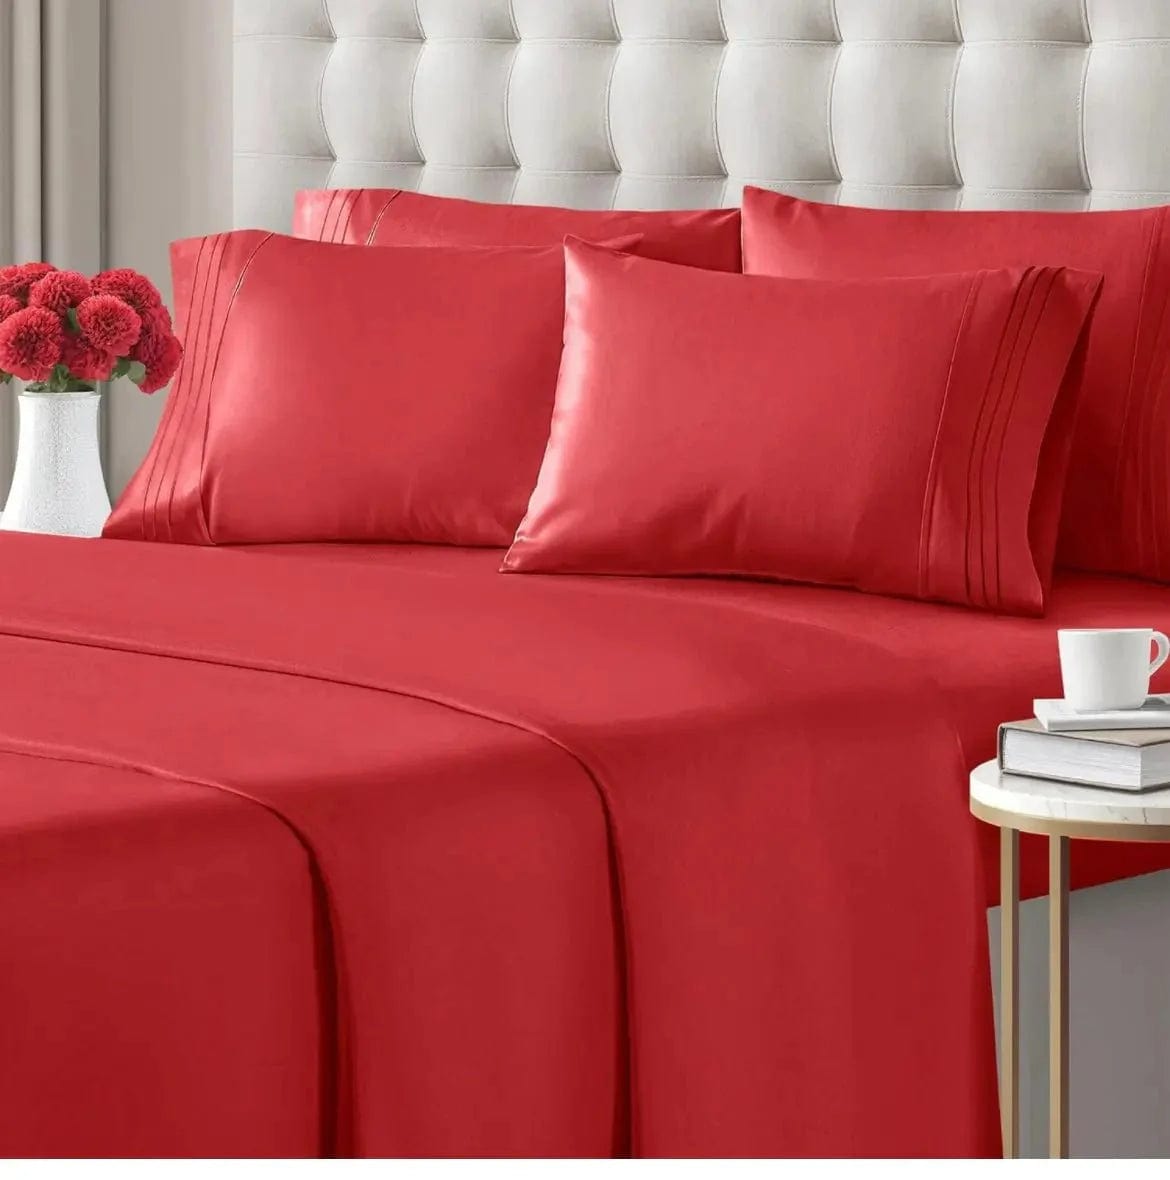 Linen World Bed Sheets Red / King “Winston” 800 Collection 6 pc Deep Pocket Sheet Set in All Sizes